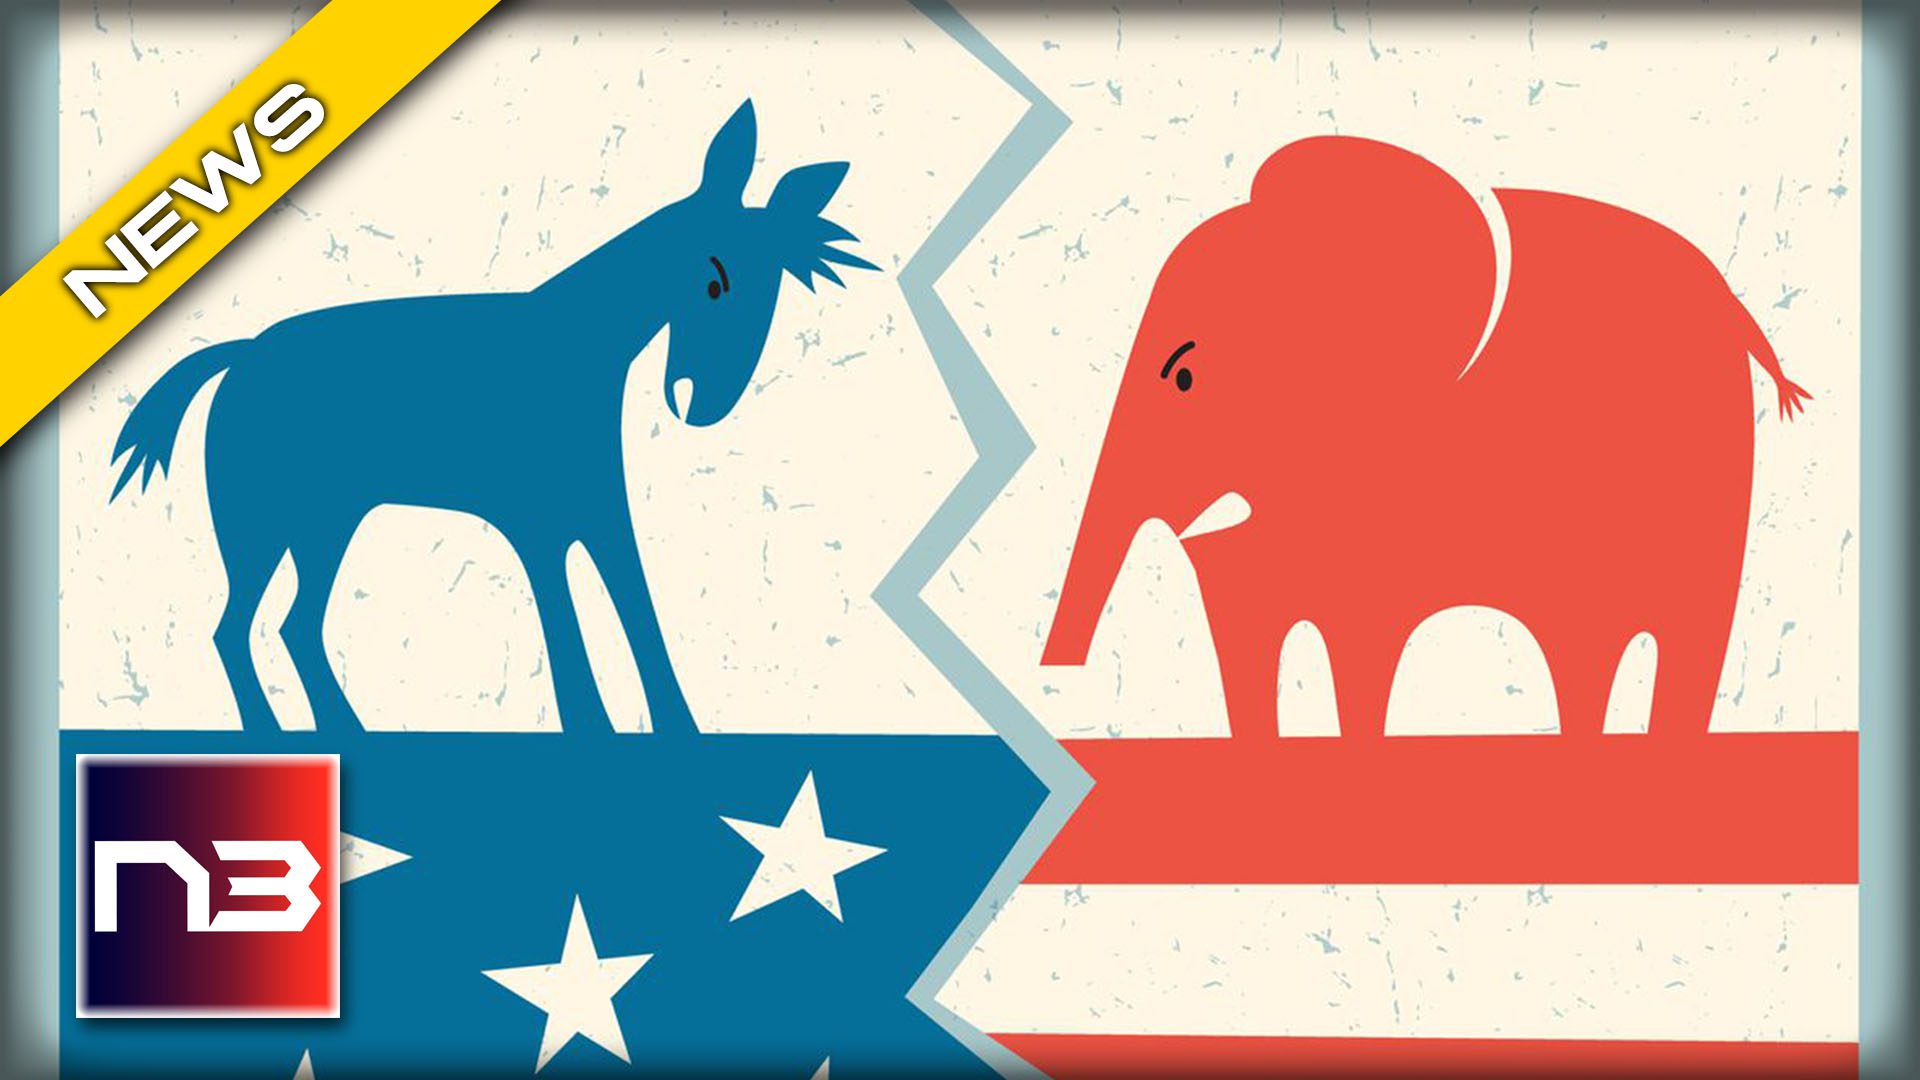 THEY’RE FINISHED. New Data Shows TOTAL DESTRUCTION For Dems in These Key Battleground States